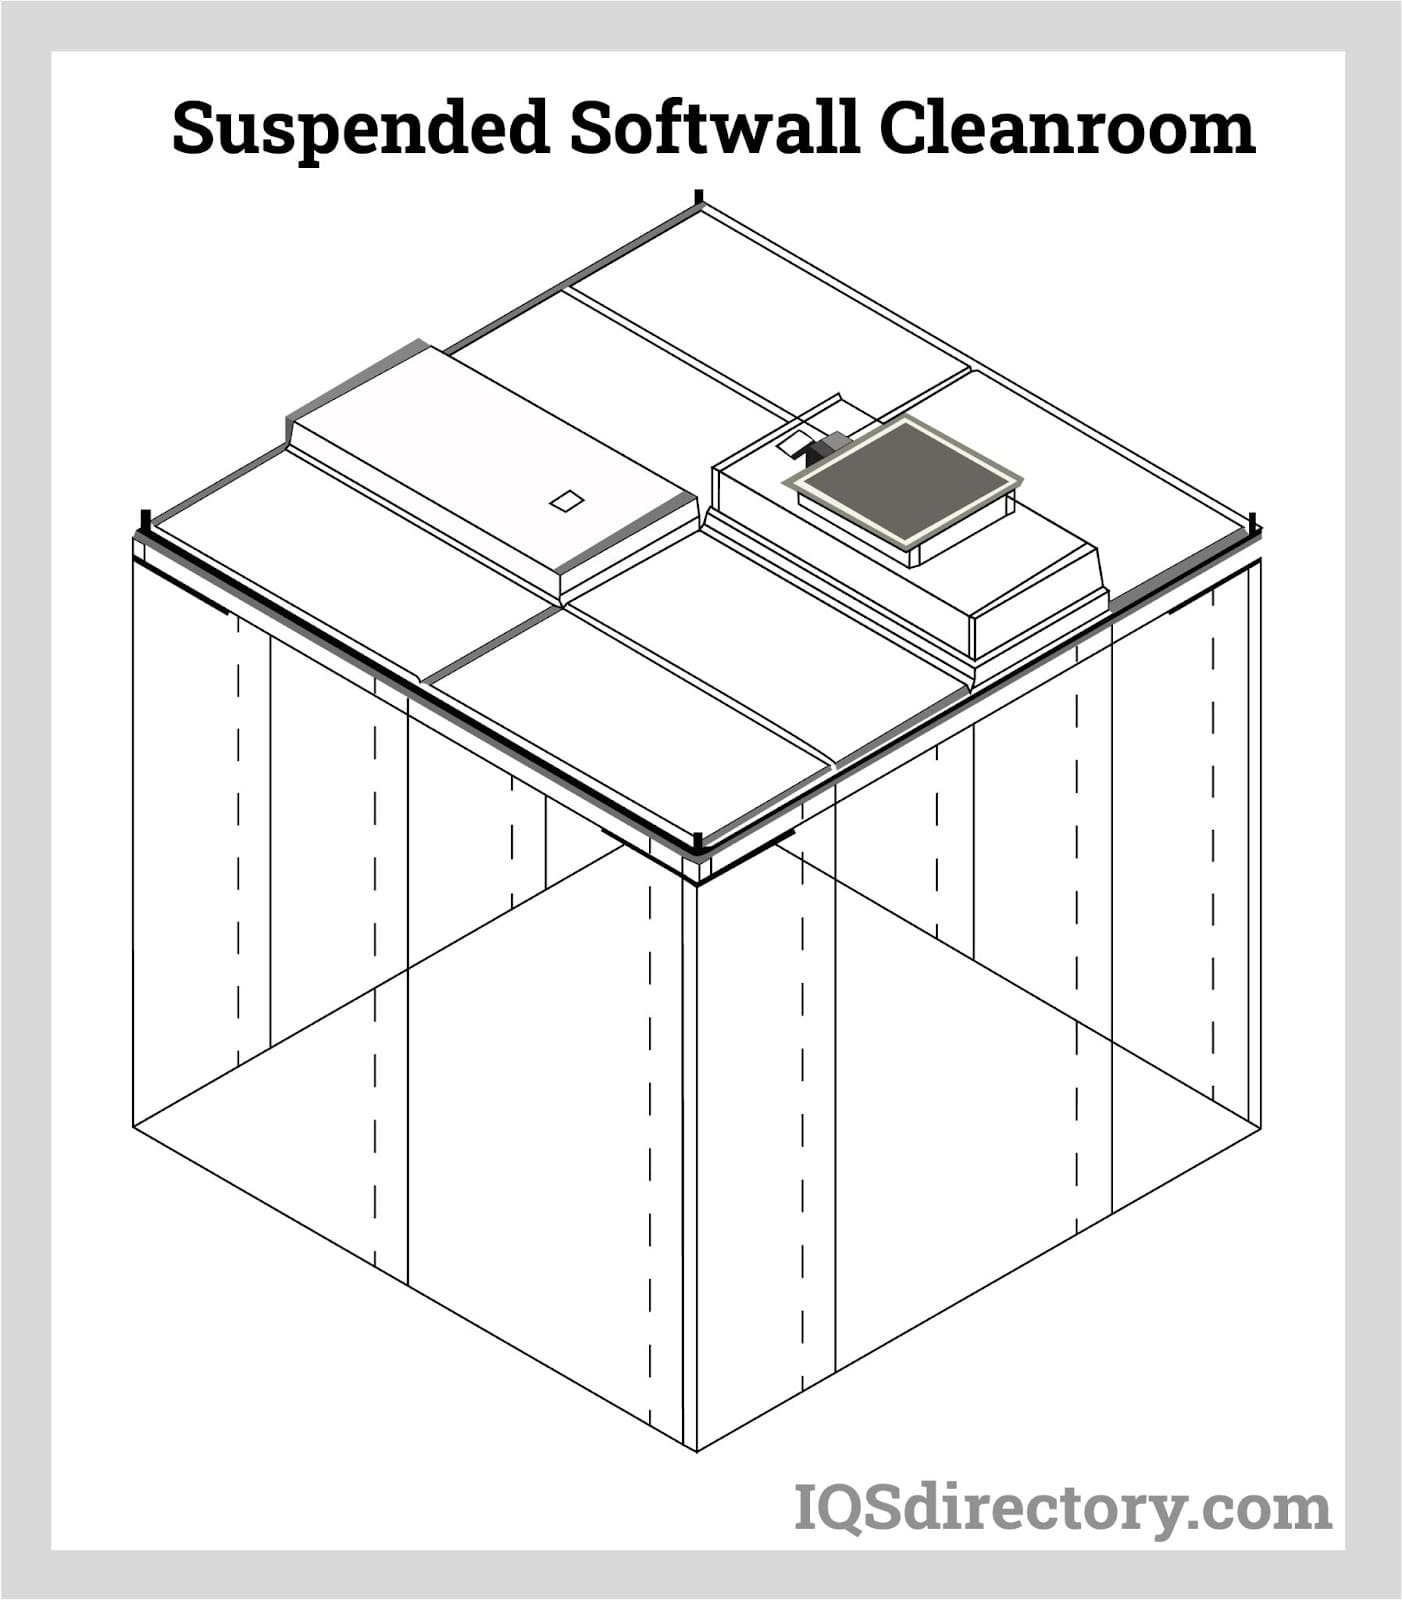 Suspended Softwall Cleanroom